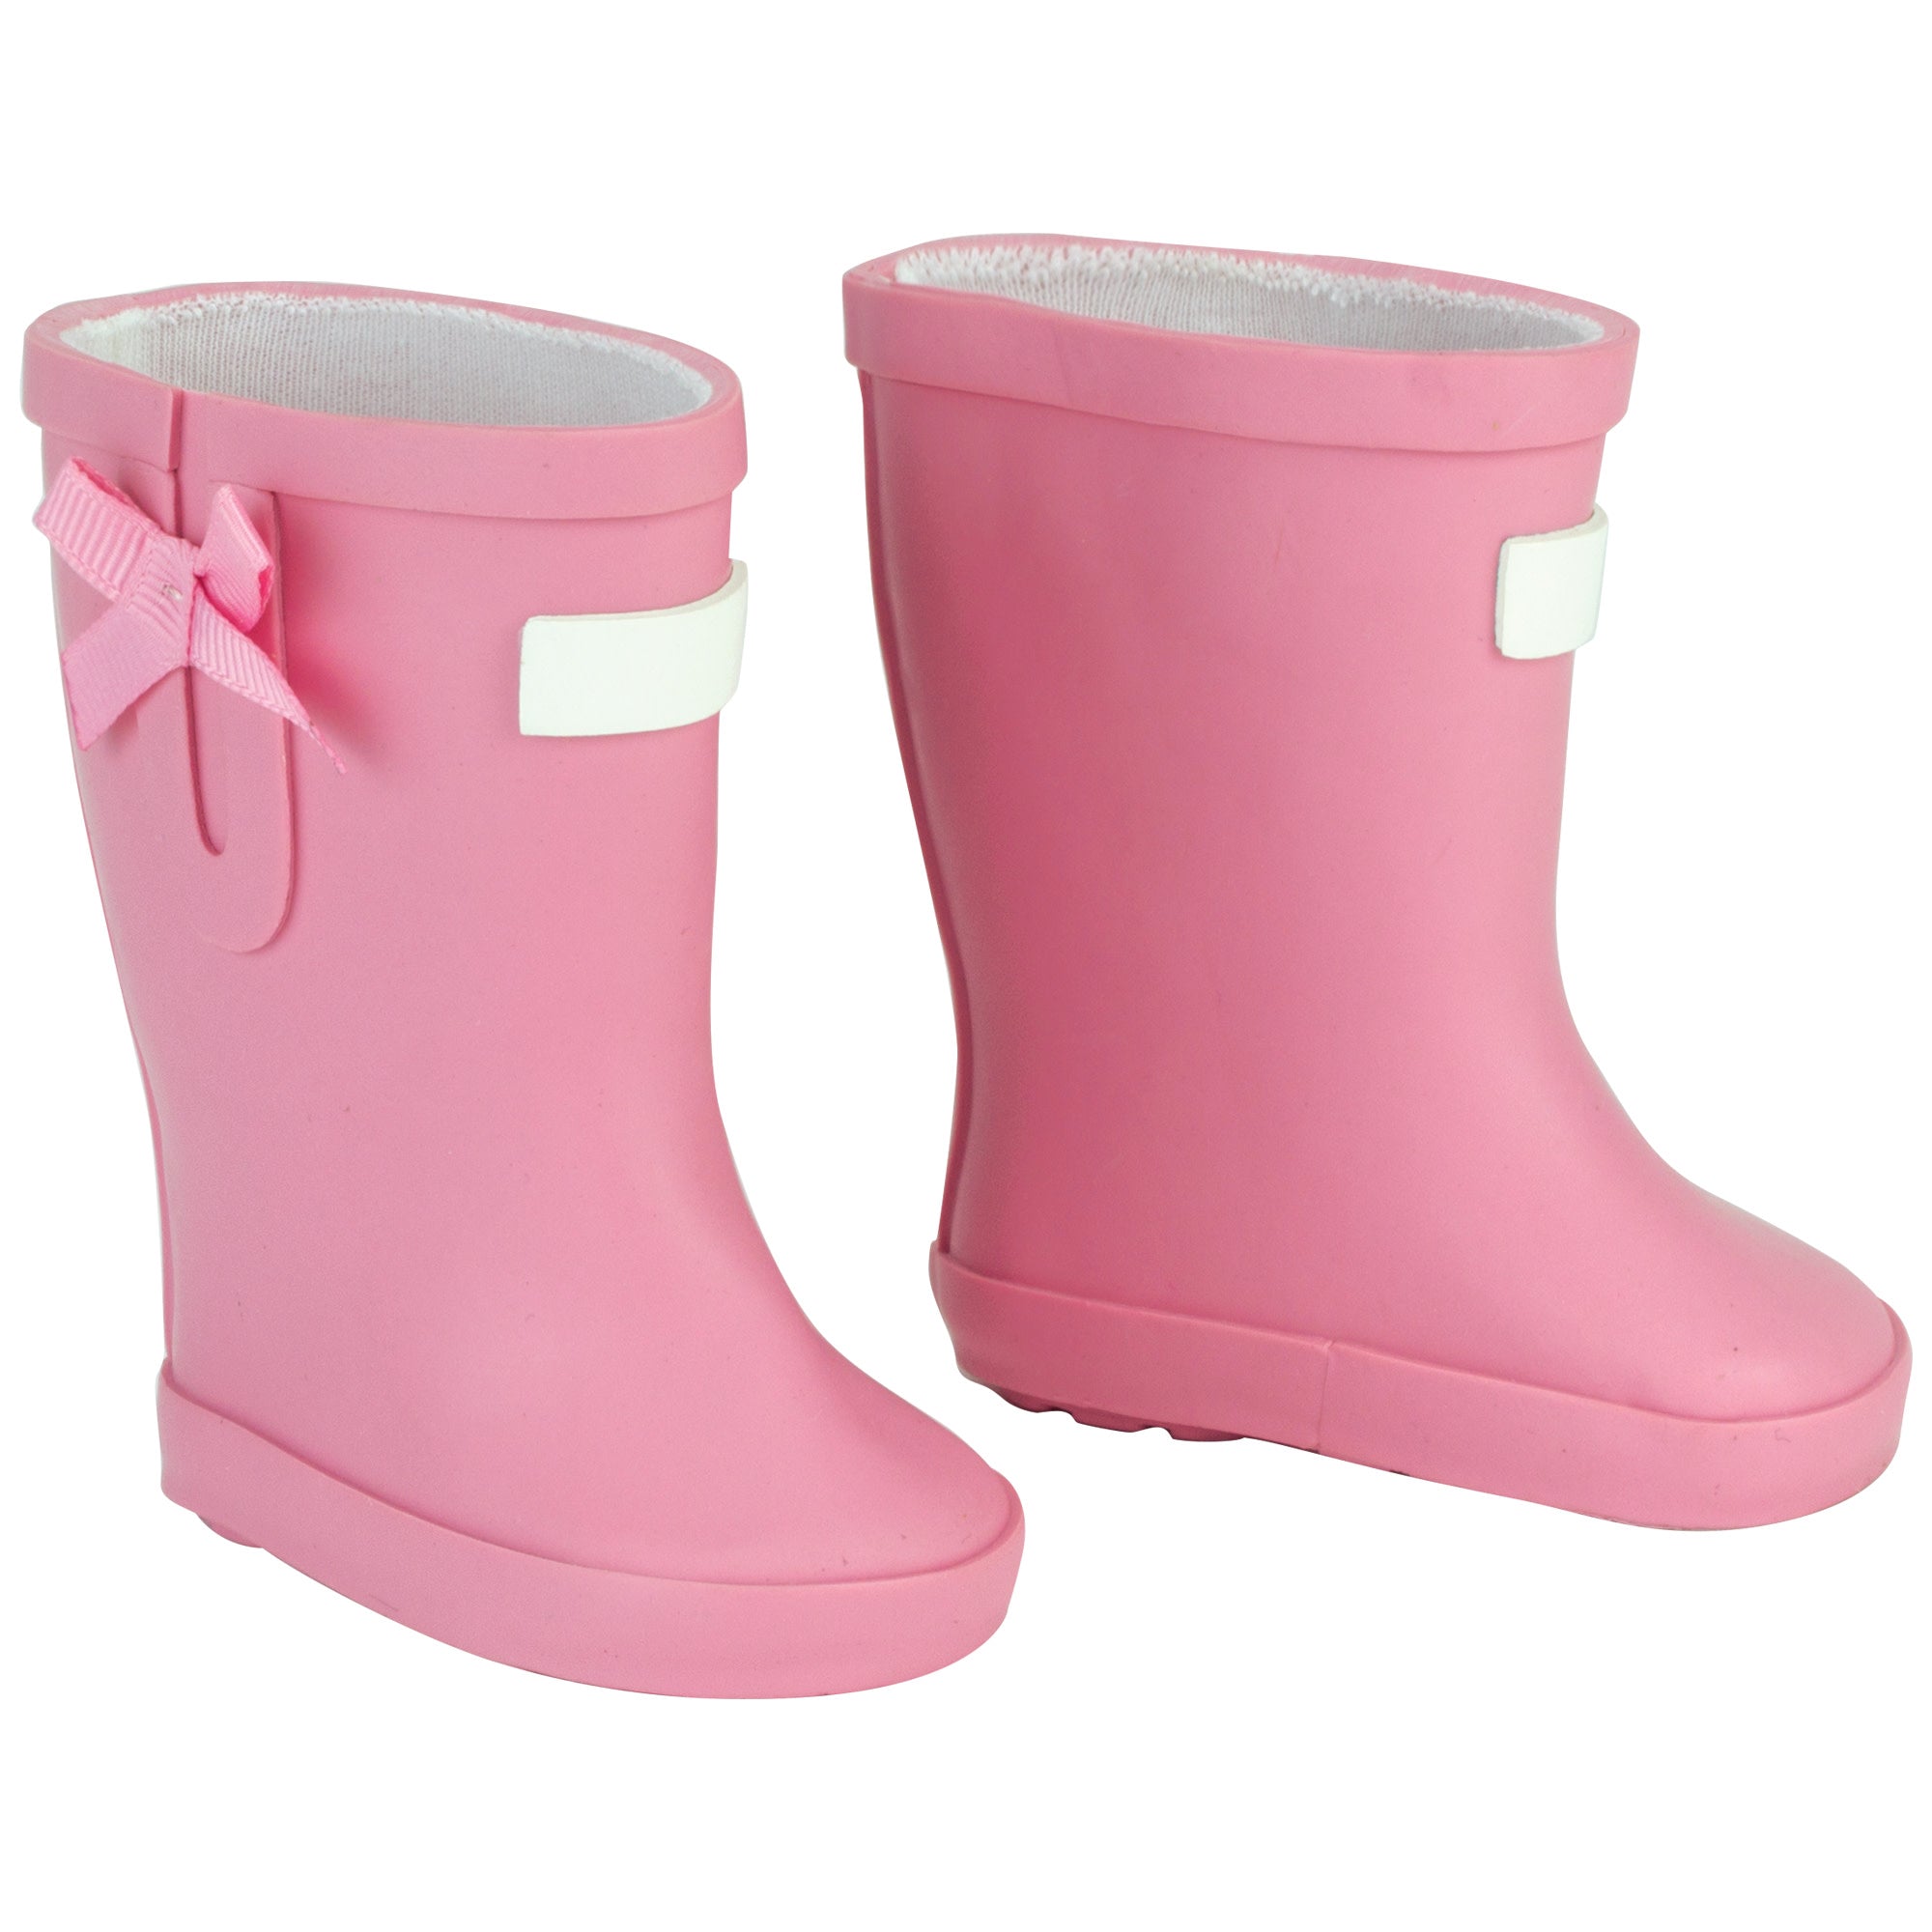 Sophia’s Super-Cute Solid-Colored Mix & Match Spring Molded Wellie Rain Boots with Bow Accents for 18” Dolls, Light Pink